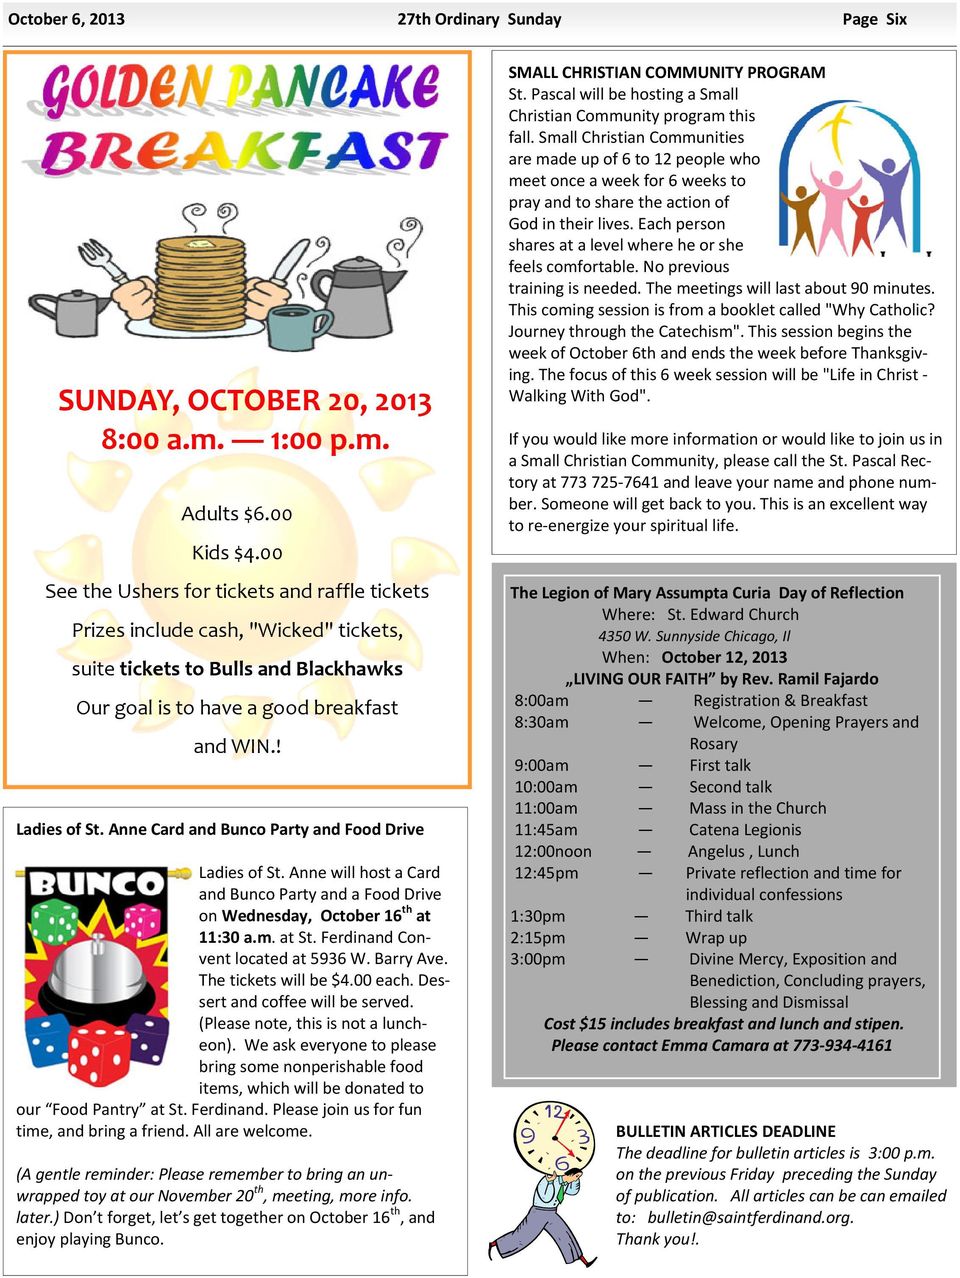 Anne Card and Bunco Party and Food Drive Ladies of St. Anne will host a Card and Bunco Party and a Food Drive on Wednesday, October 16 th at 11:30 a.m. at St. Ferdinand Convent located at 5936 W.